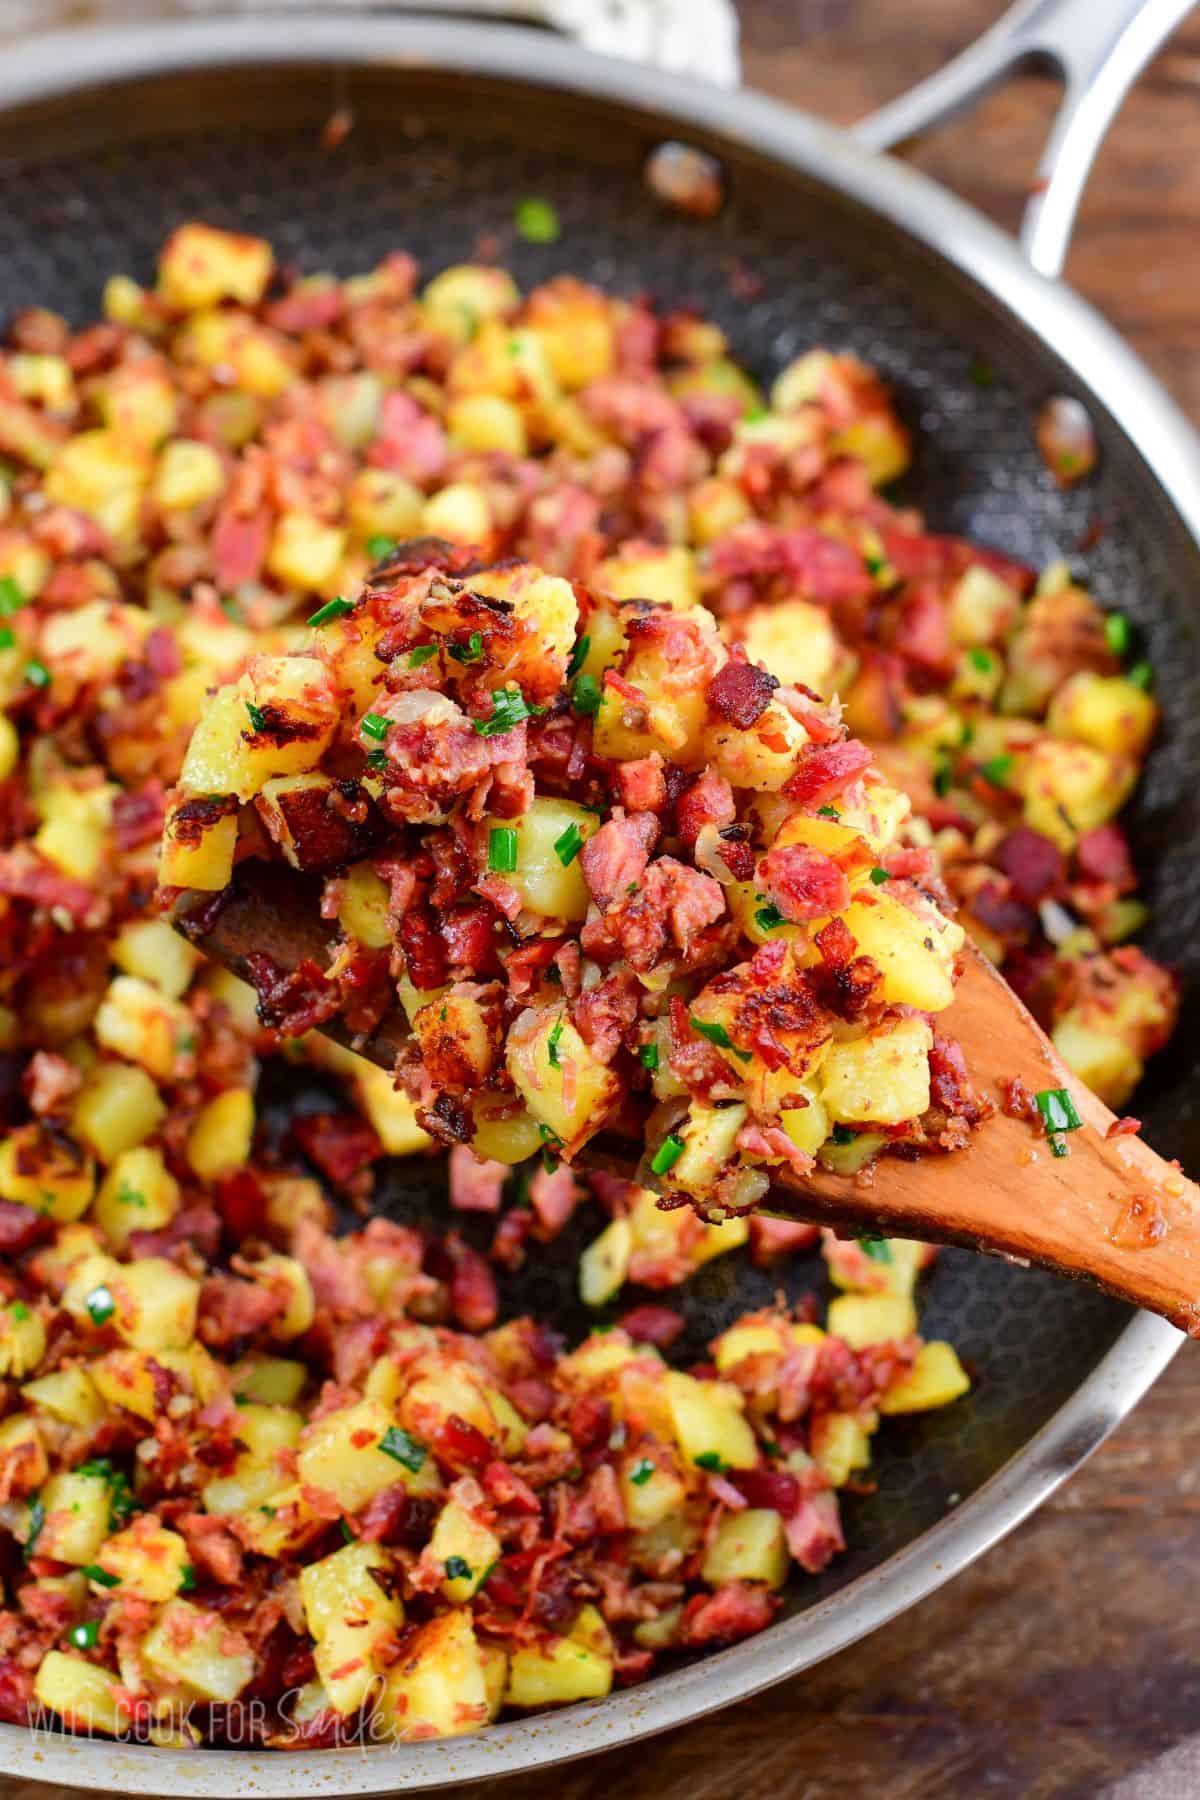 Scooping corn beef hash out of a pan.